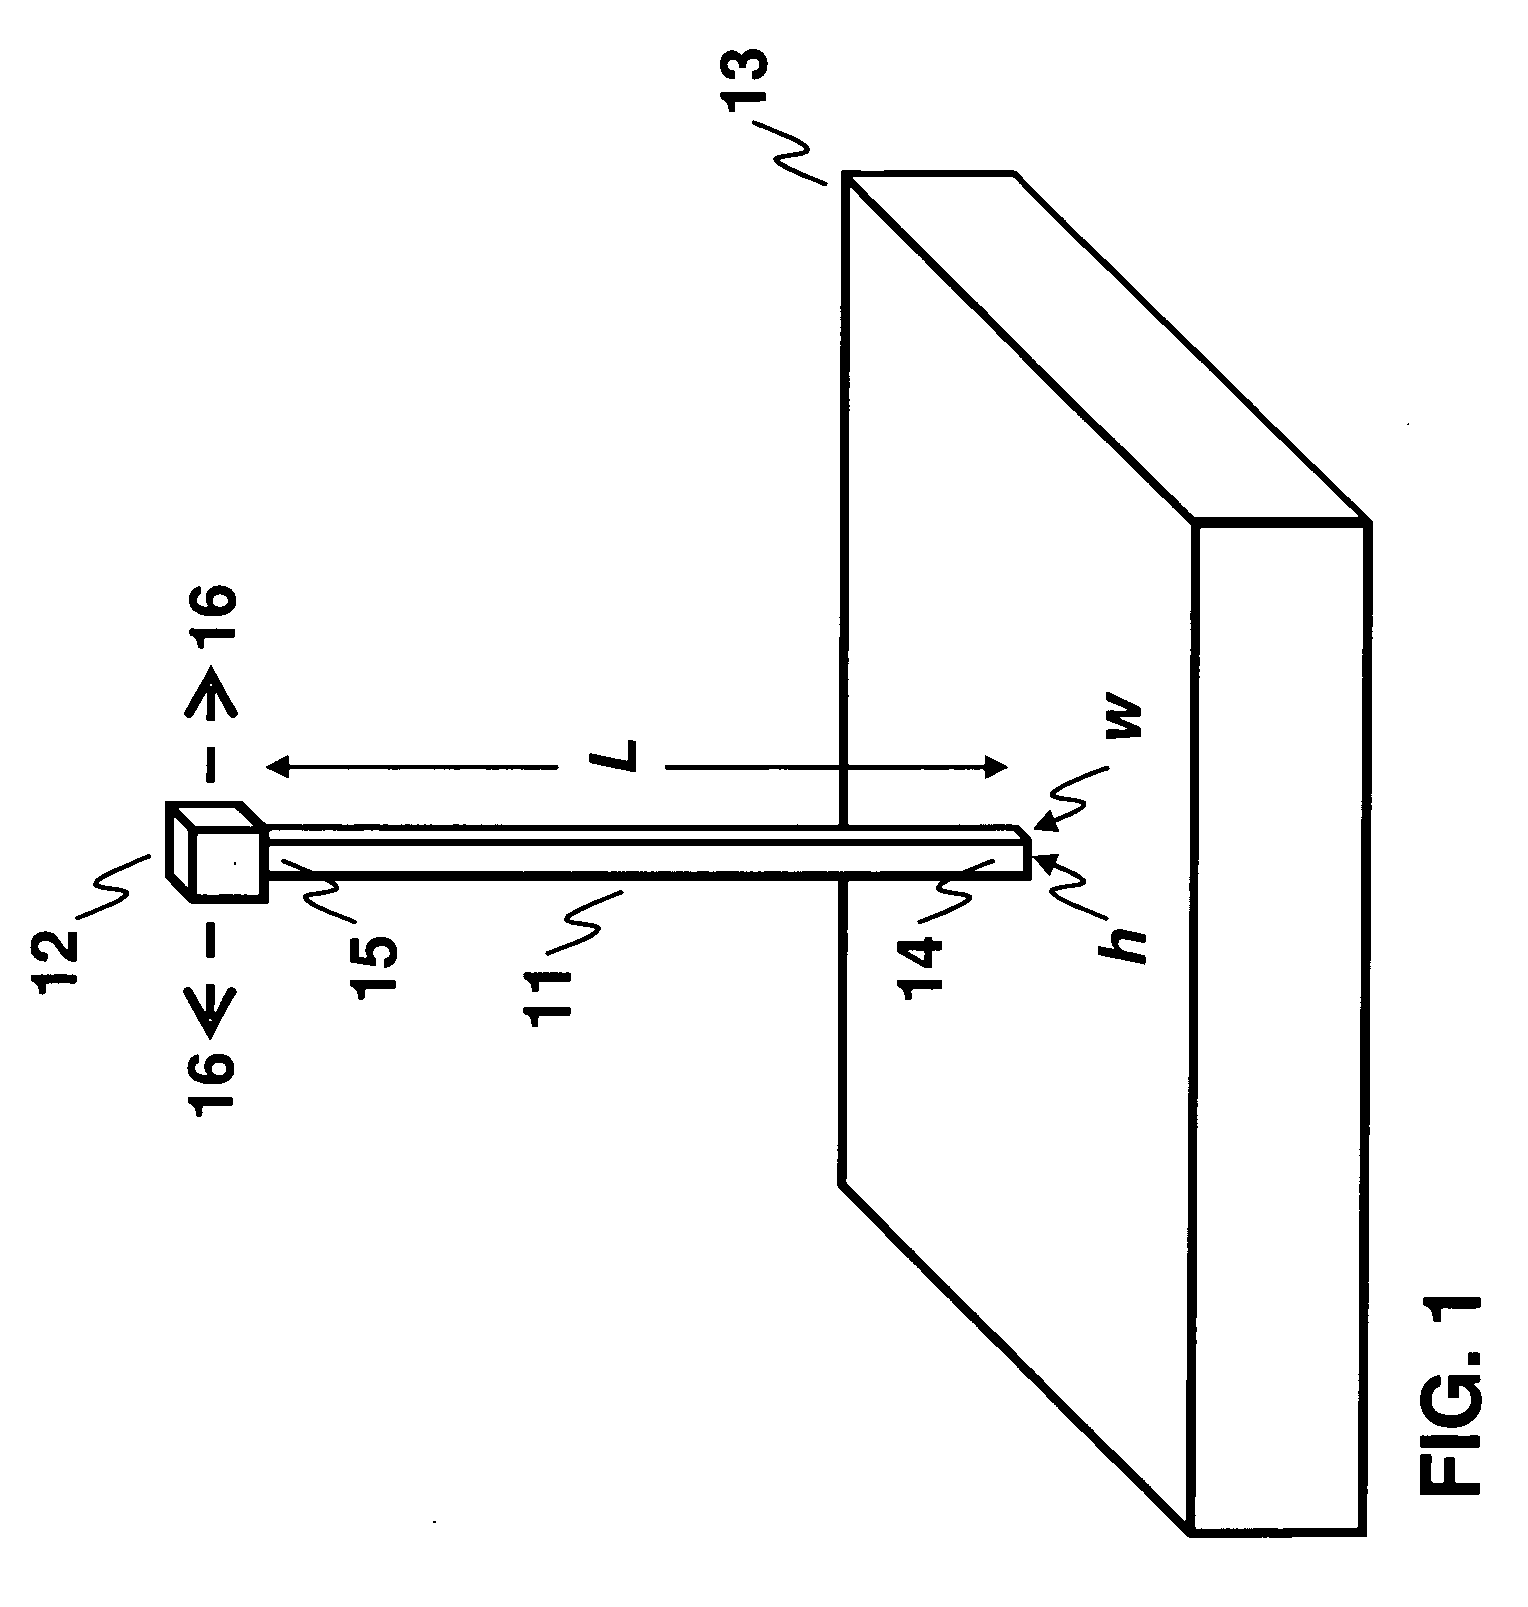 System and method for detecting onset of structural failure